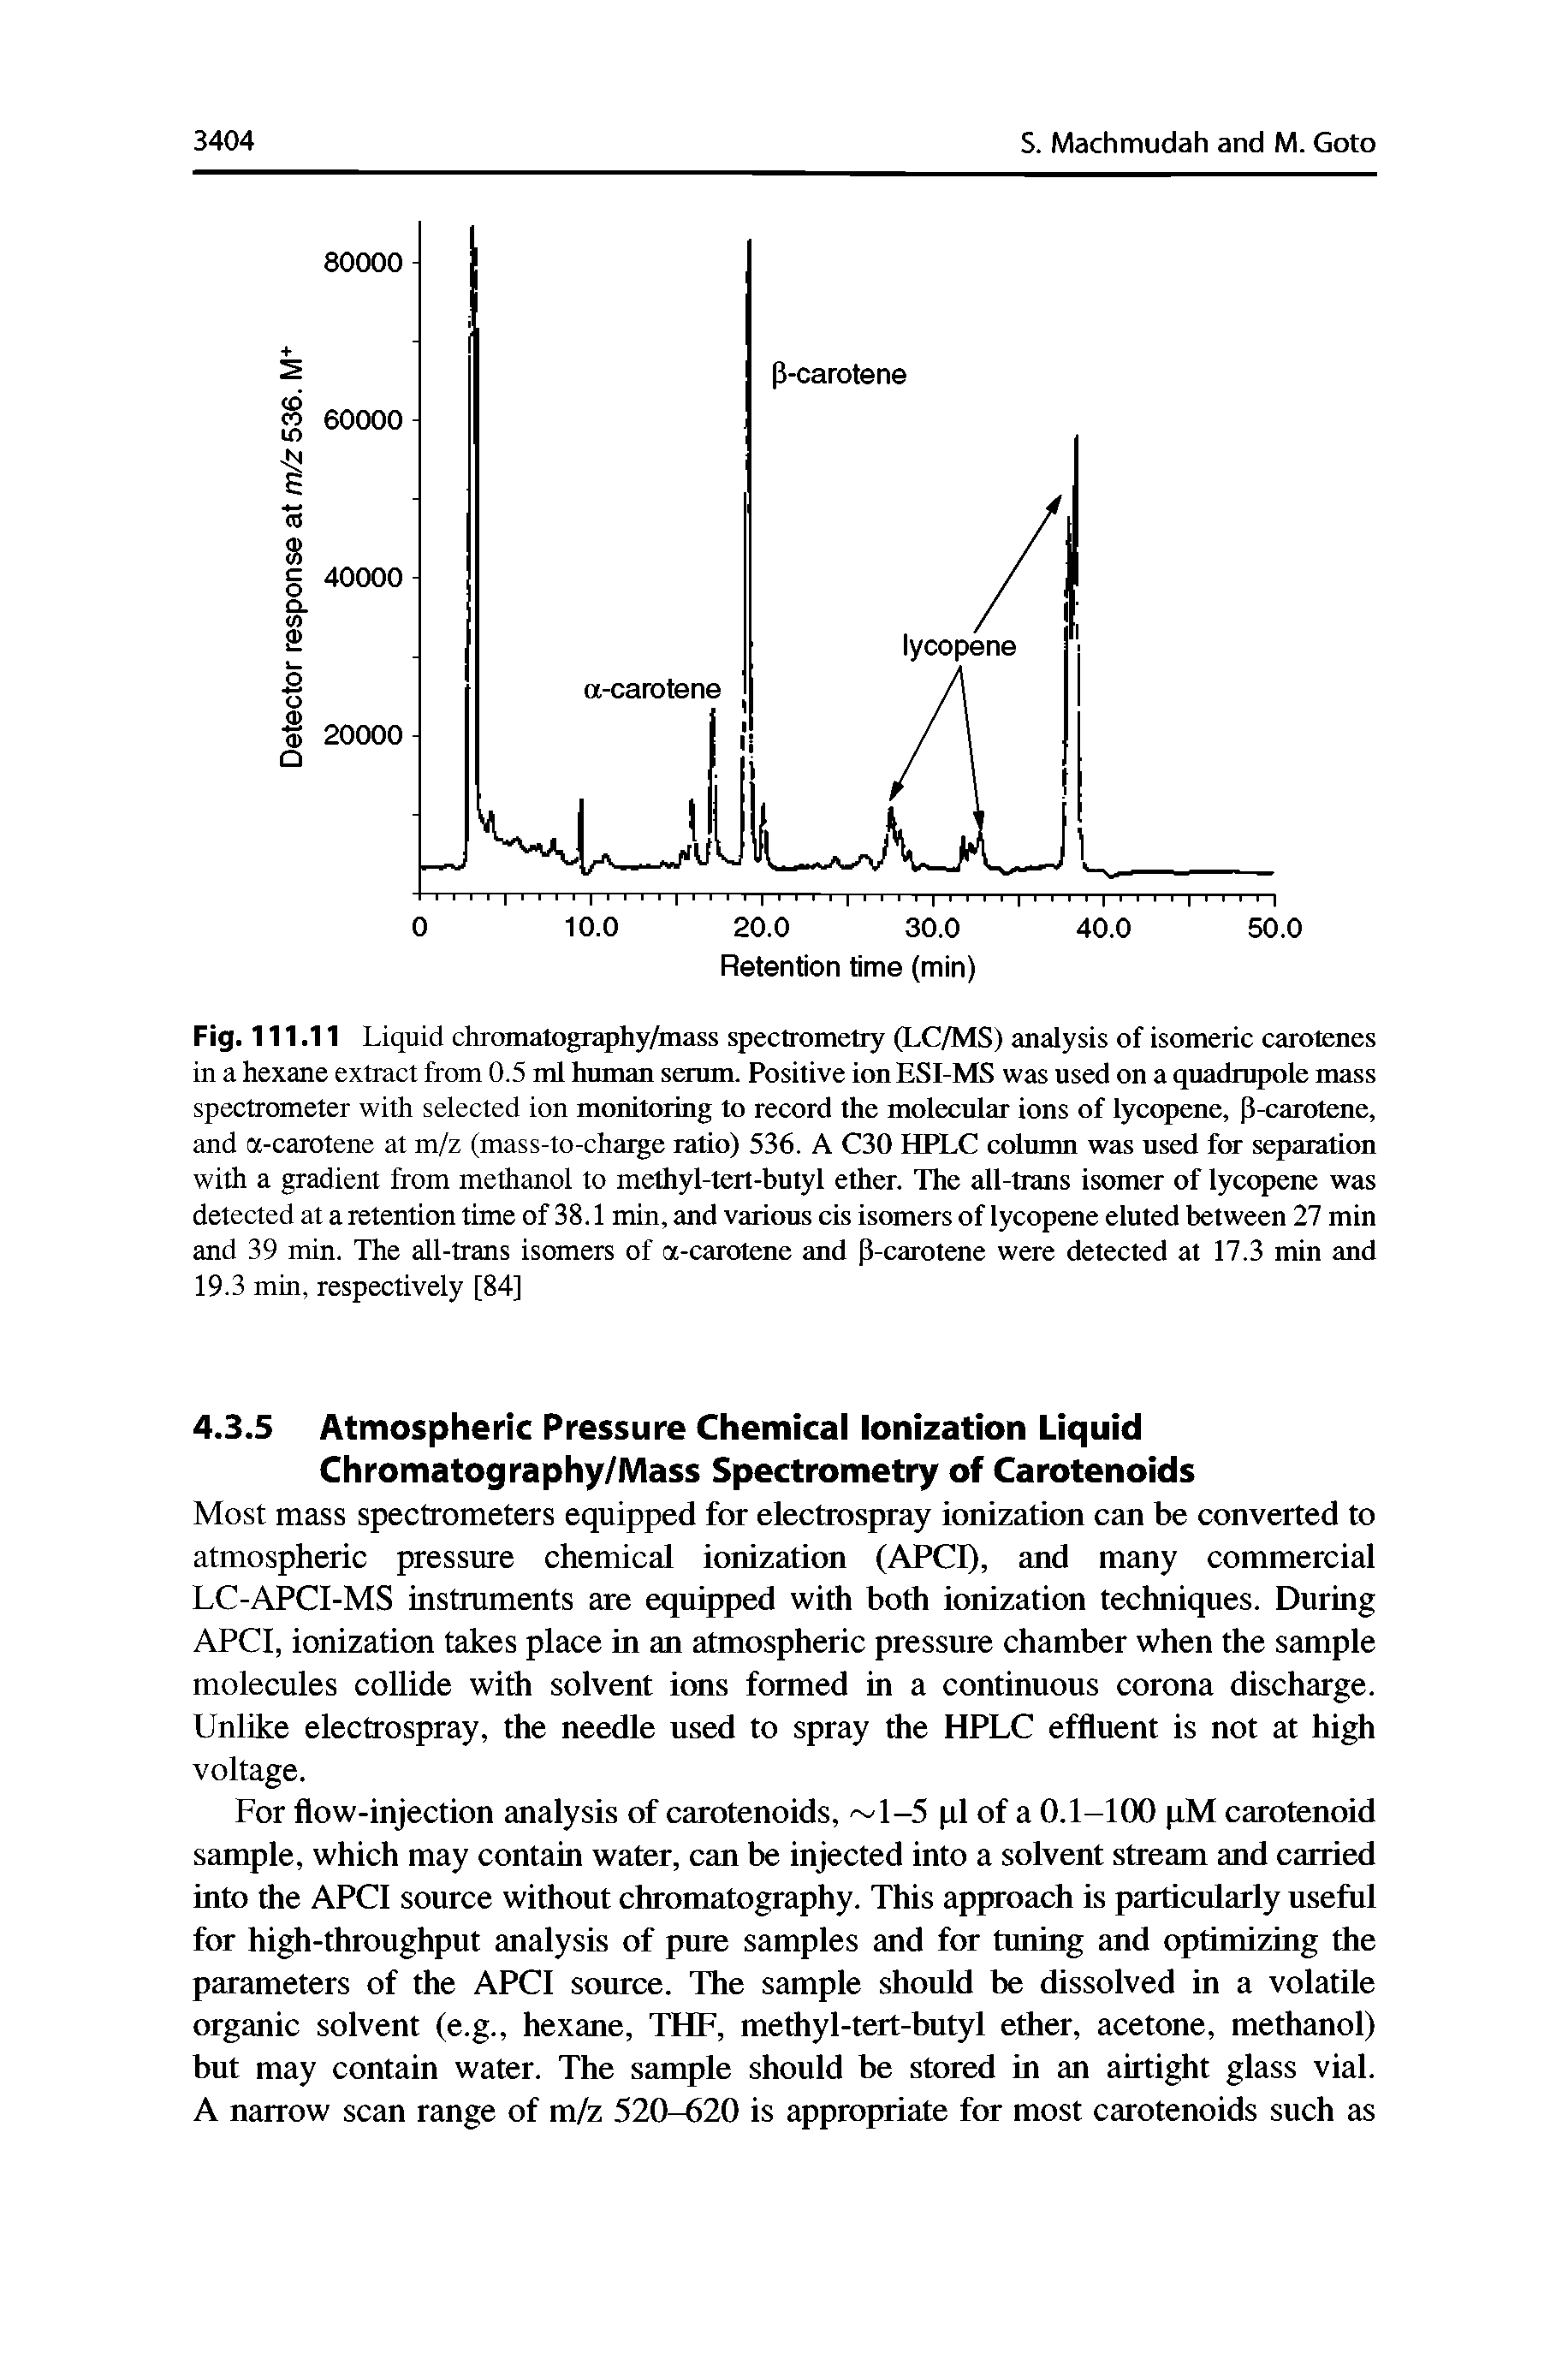 Fig. 111.11 Liquid chromatography/mass spectrometry (LC/MS) analysis of isomeric carotenes in a hexane extract from 0.5 ml human serum. Positive ionESI-MS was used on a quadrupole mass spectrometer with selected ion monitoring to record the molecular ions of lycopene, P-carotene, and a-carotene at m/z (mass-to-charge ratio) 536. A C30 HPLC column was used for separation with a gradient from methanol to methyl-tert-butyl ether. The all-trans isomer of lycopene was detected at a retention time of 38.1 min, and various cis isomers of lycopene eluted between 27 min and 39 min. The all-trans isomers of a-carotene and P-carotene were detected at 17.3 min and 19.3 min, respectively [84]...